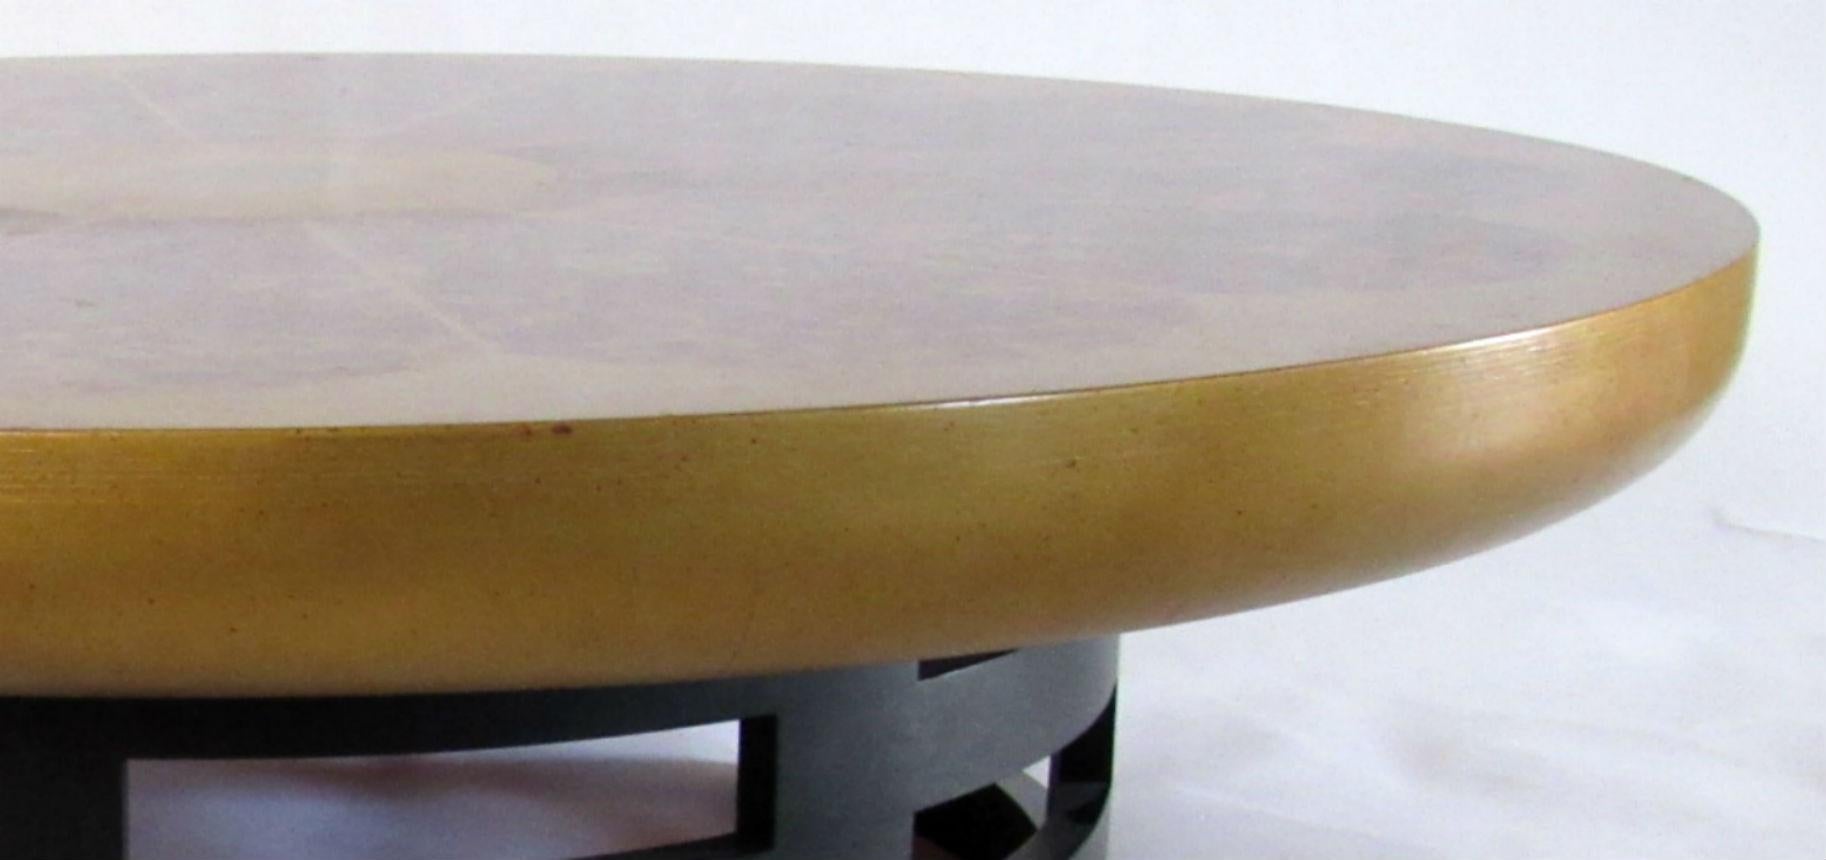 American Kittinger Coffee Table by Theodore Muller and Isabel Barriger 1950s For Sale